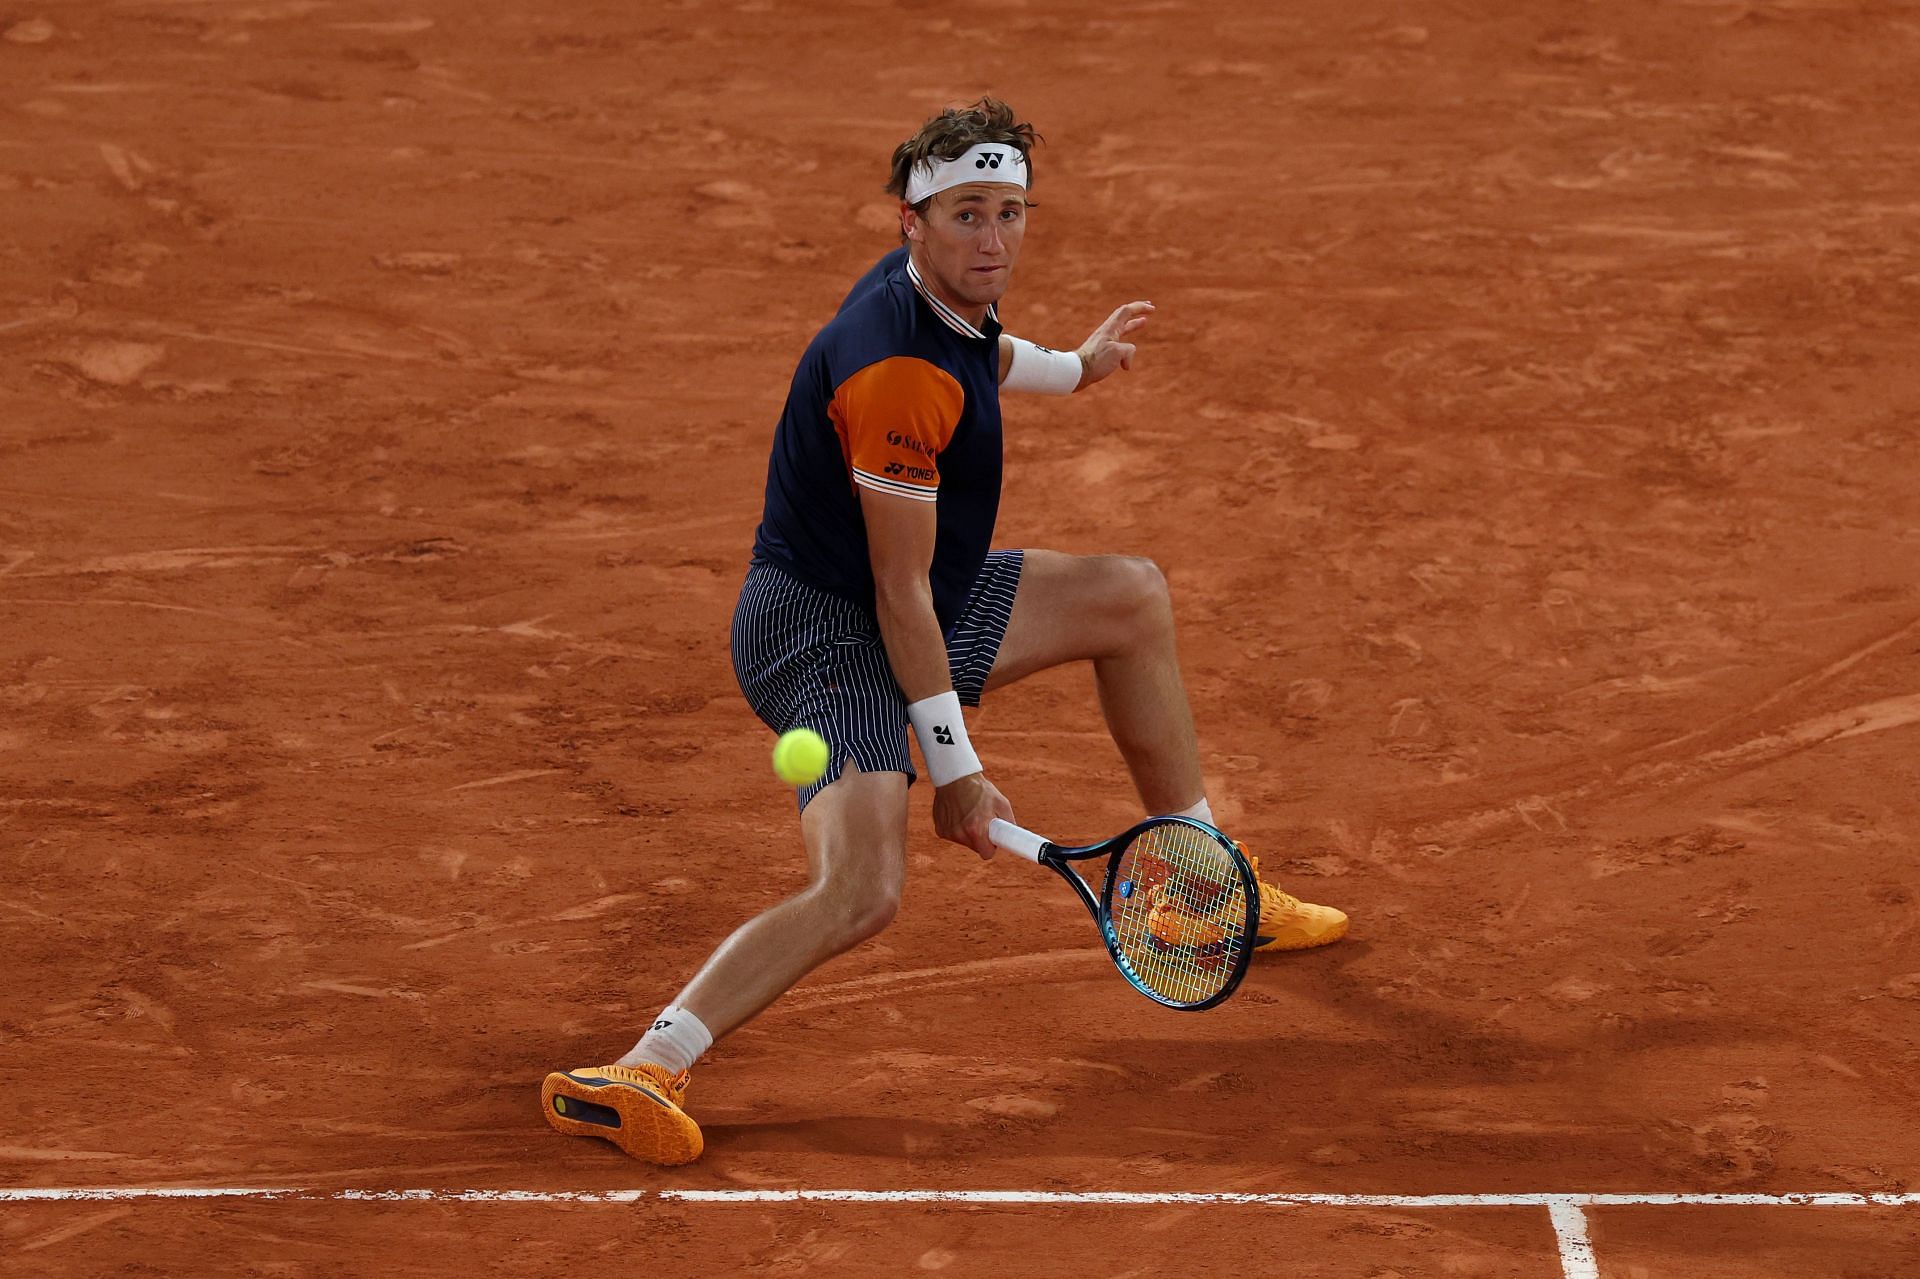 Ruud is back in the Roland Garros semifinal.